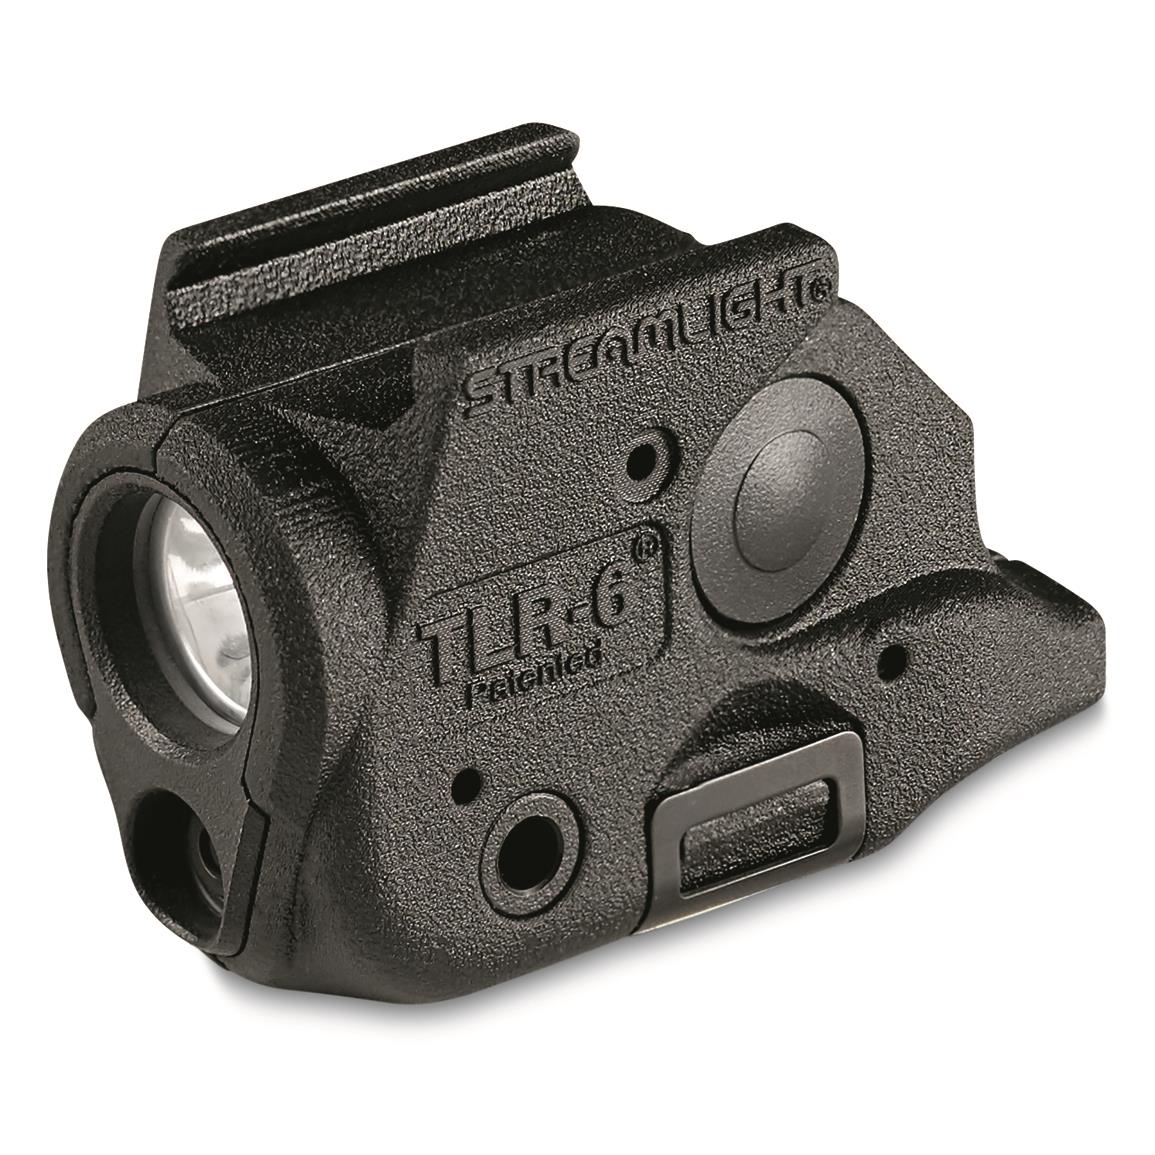 Streamlight TLR-6 LED Tactical Light/Red Laser for Springfield Hellcat